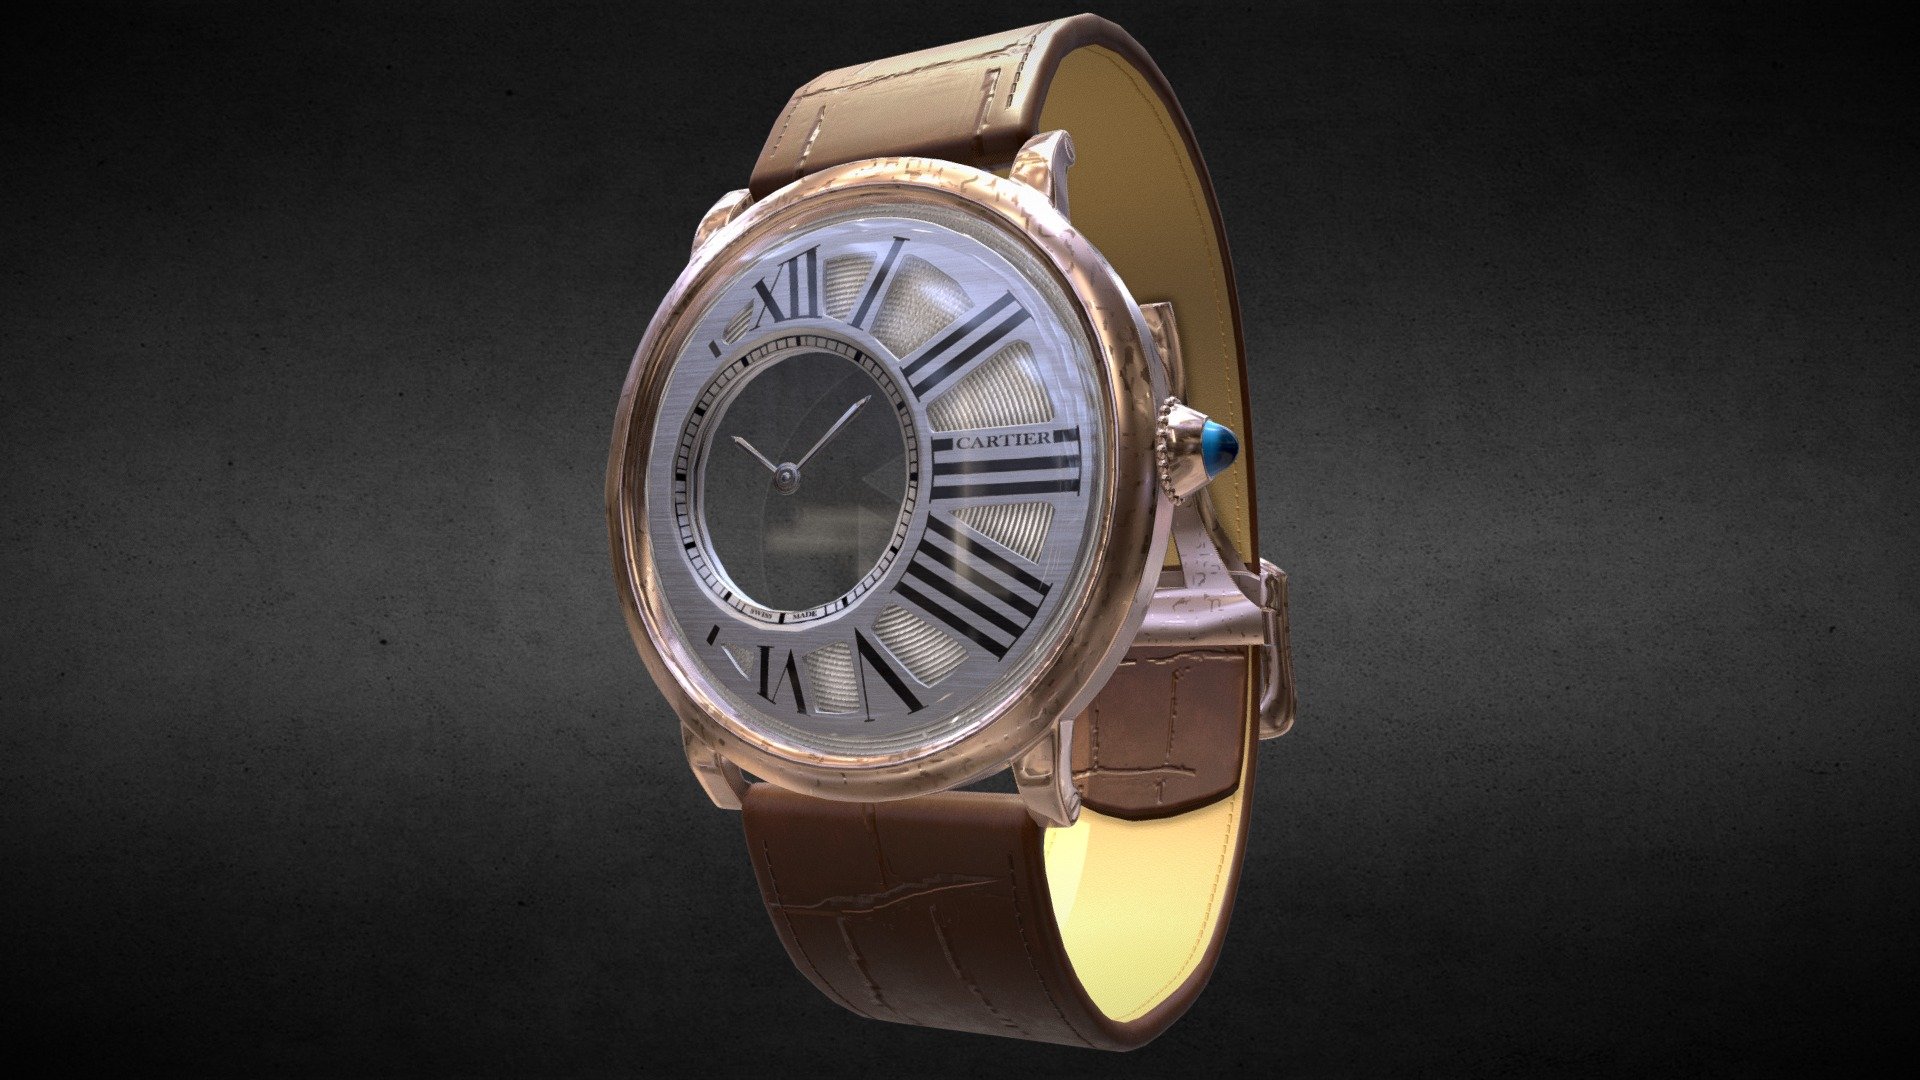 Awesome stainless steel Rotonde Mysterious Hours Mechanical Watch․
Use for Unreal Engine 4 and Unity3D. Try in augmented reality in the AR-Watches app. 
Links to the app: Android, iOS

Currently available for download in FBX format.

3D model developed by AR-Watches

Disclaimer: We do not own the design of the watch, we only made the 3D model 3d model